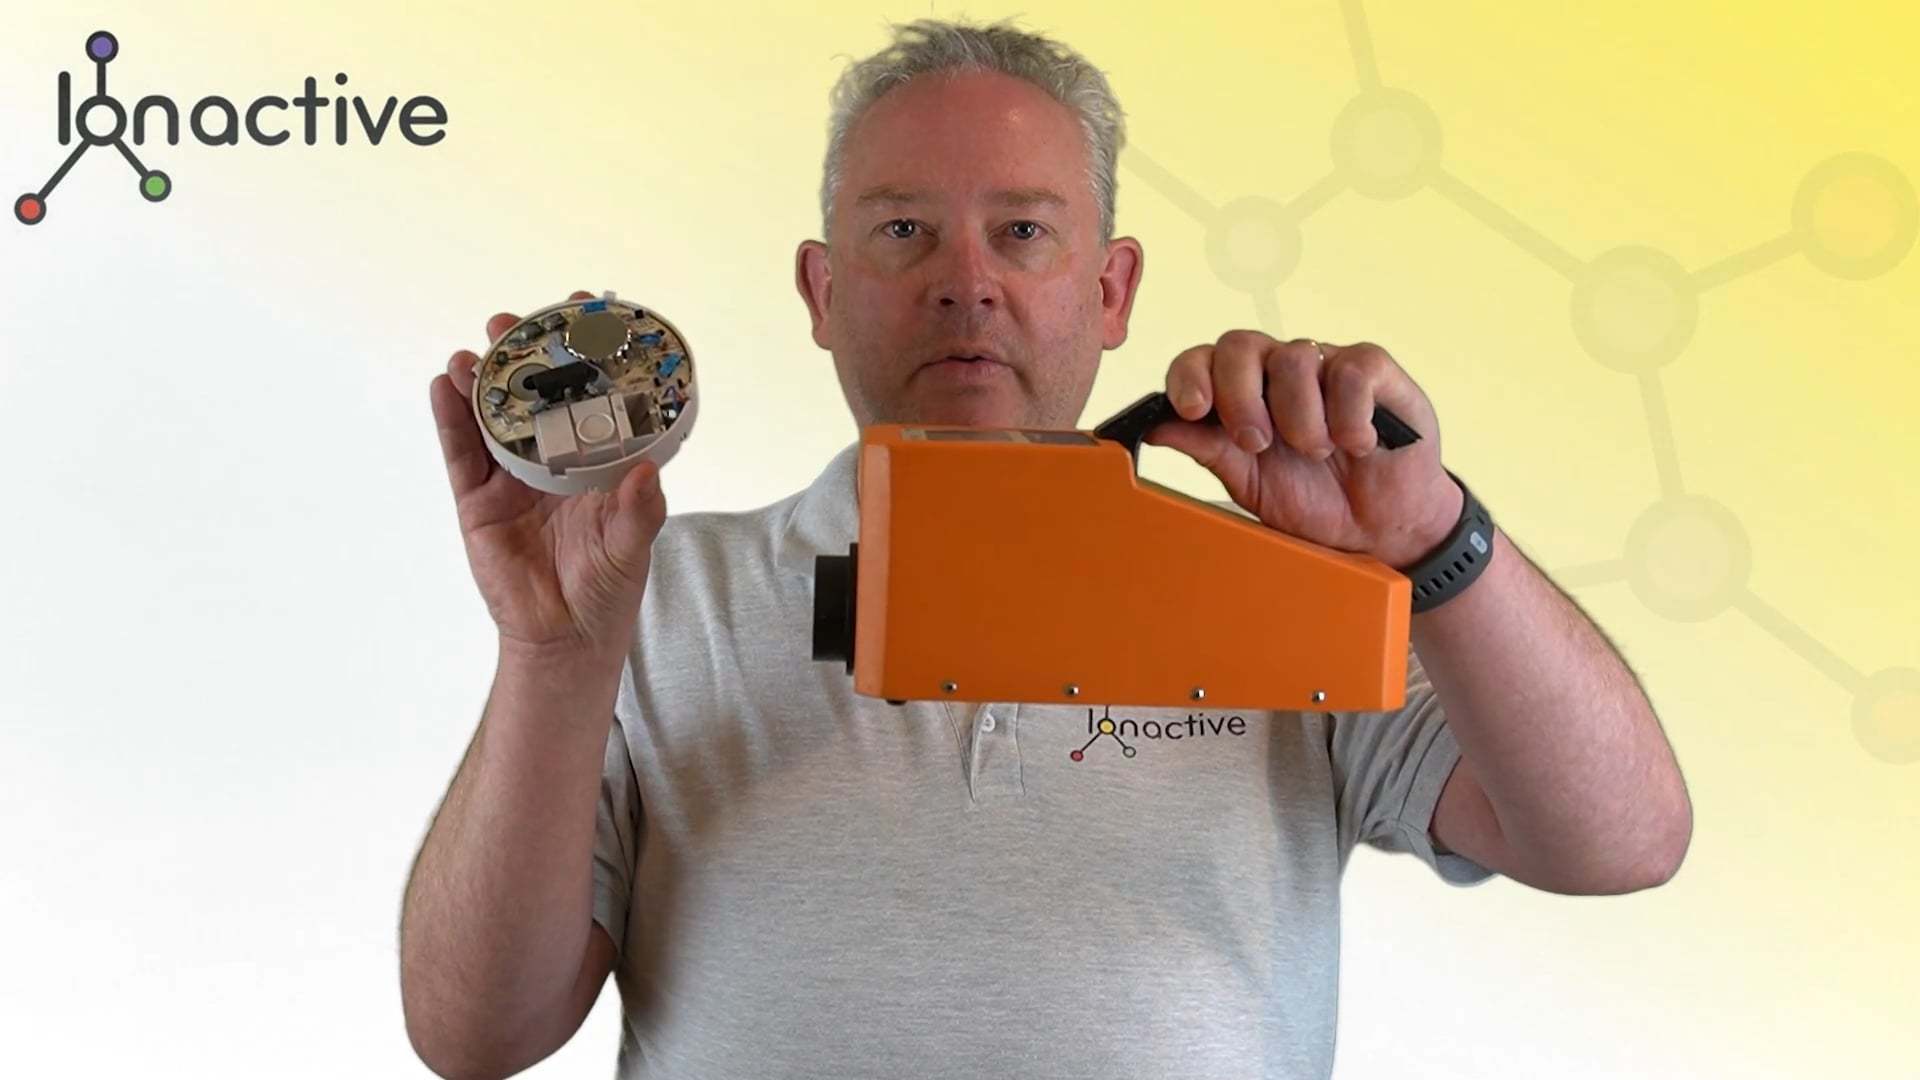 Mark Ramsay finding things radioactive around the house Video frame capture